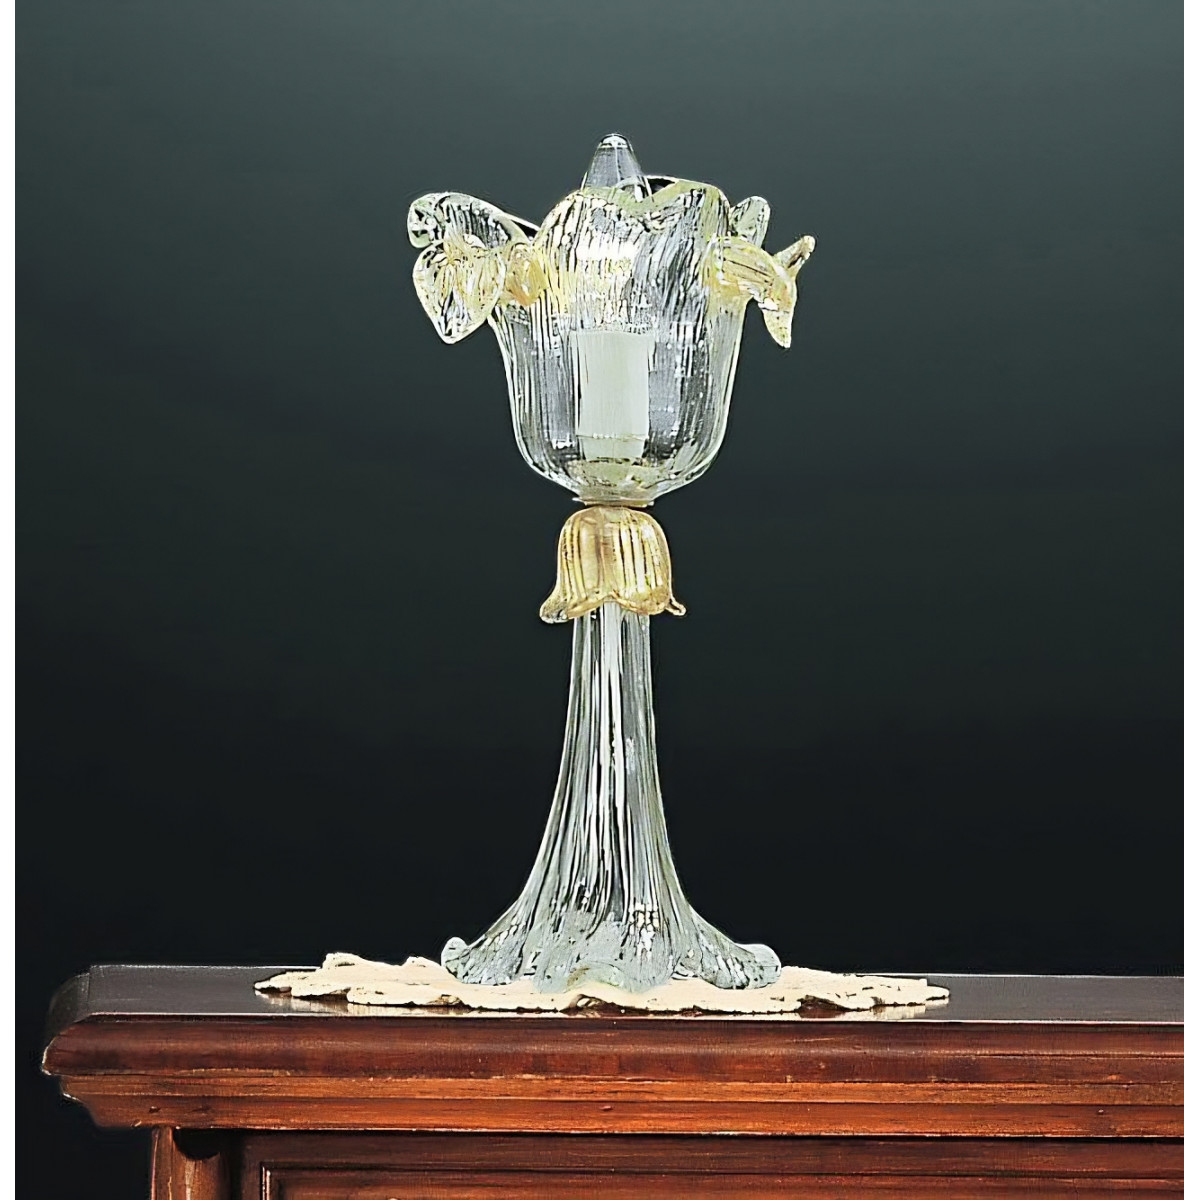 Accademia 1 light Murano small table lamp - transparent gold color